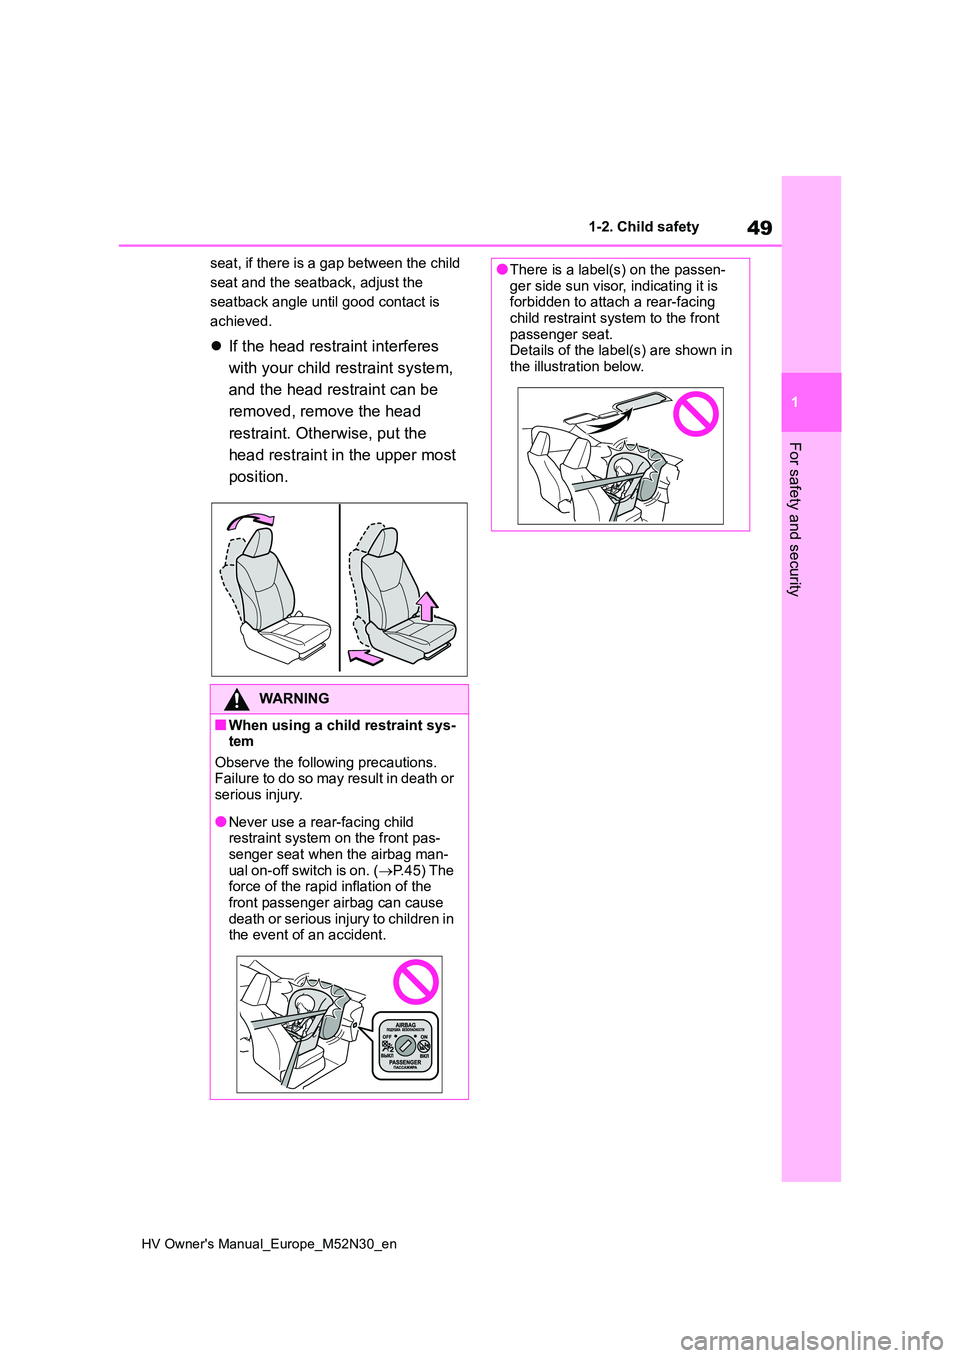 TOYOTA YARIS 2022 User Guide 49
1
HV Owner's Manual_Europe_M52N30_en
1-2. Child safety
For safety and security
seat, if there is a gap between the child  
seat and the seatback, adjust the 
seatback angle until good contact i